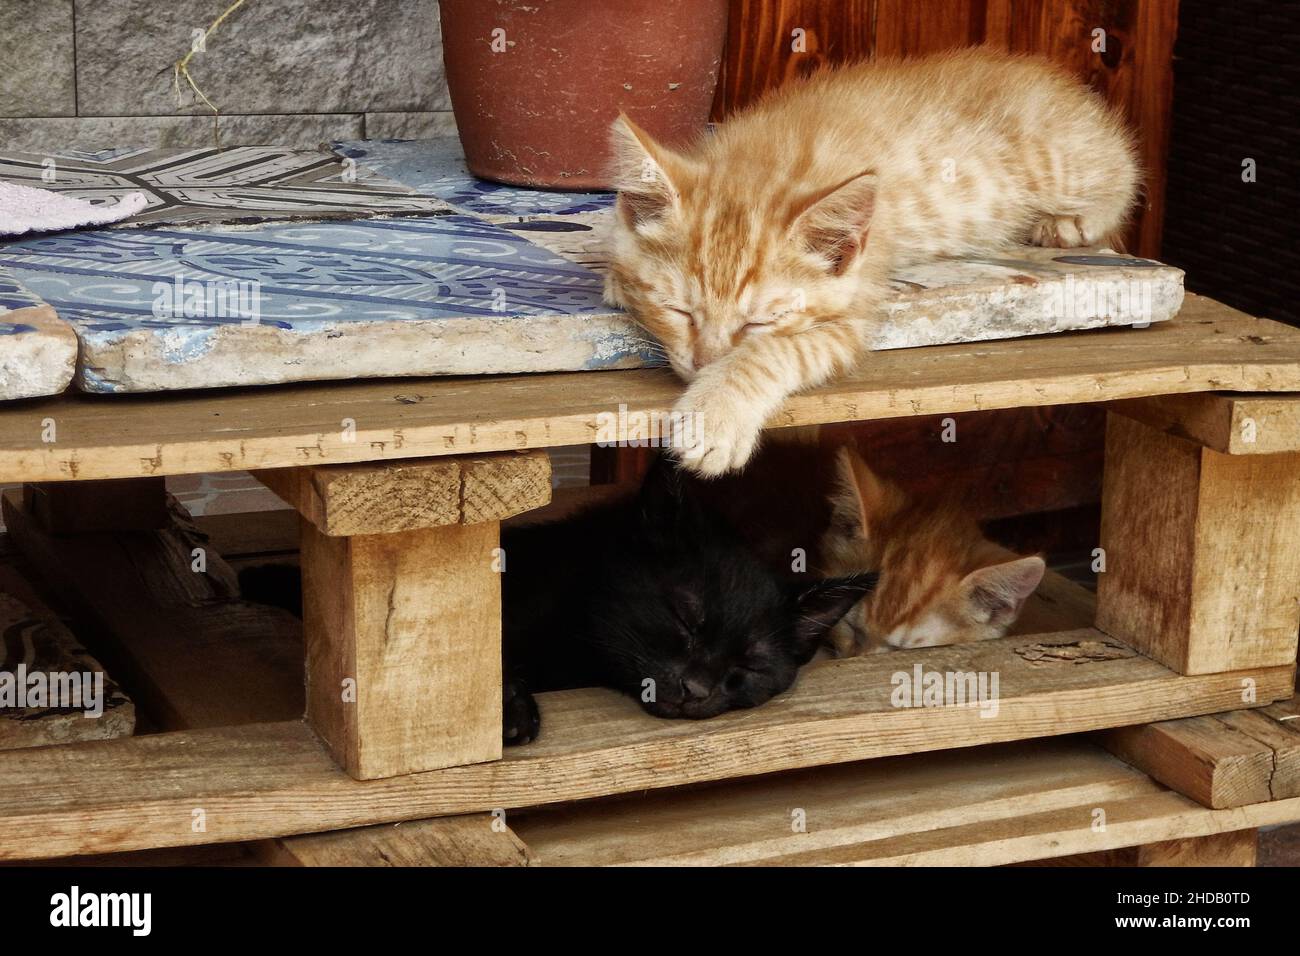 Close-up of three cats sleeping on a wooden pallet shelves Stock Photo